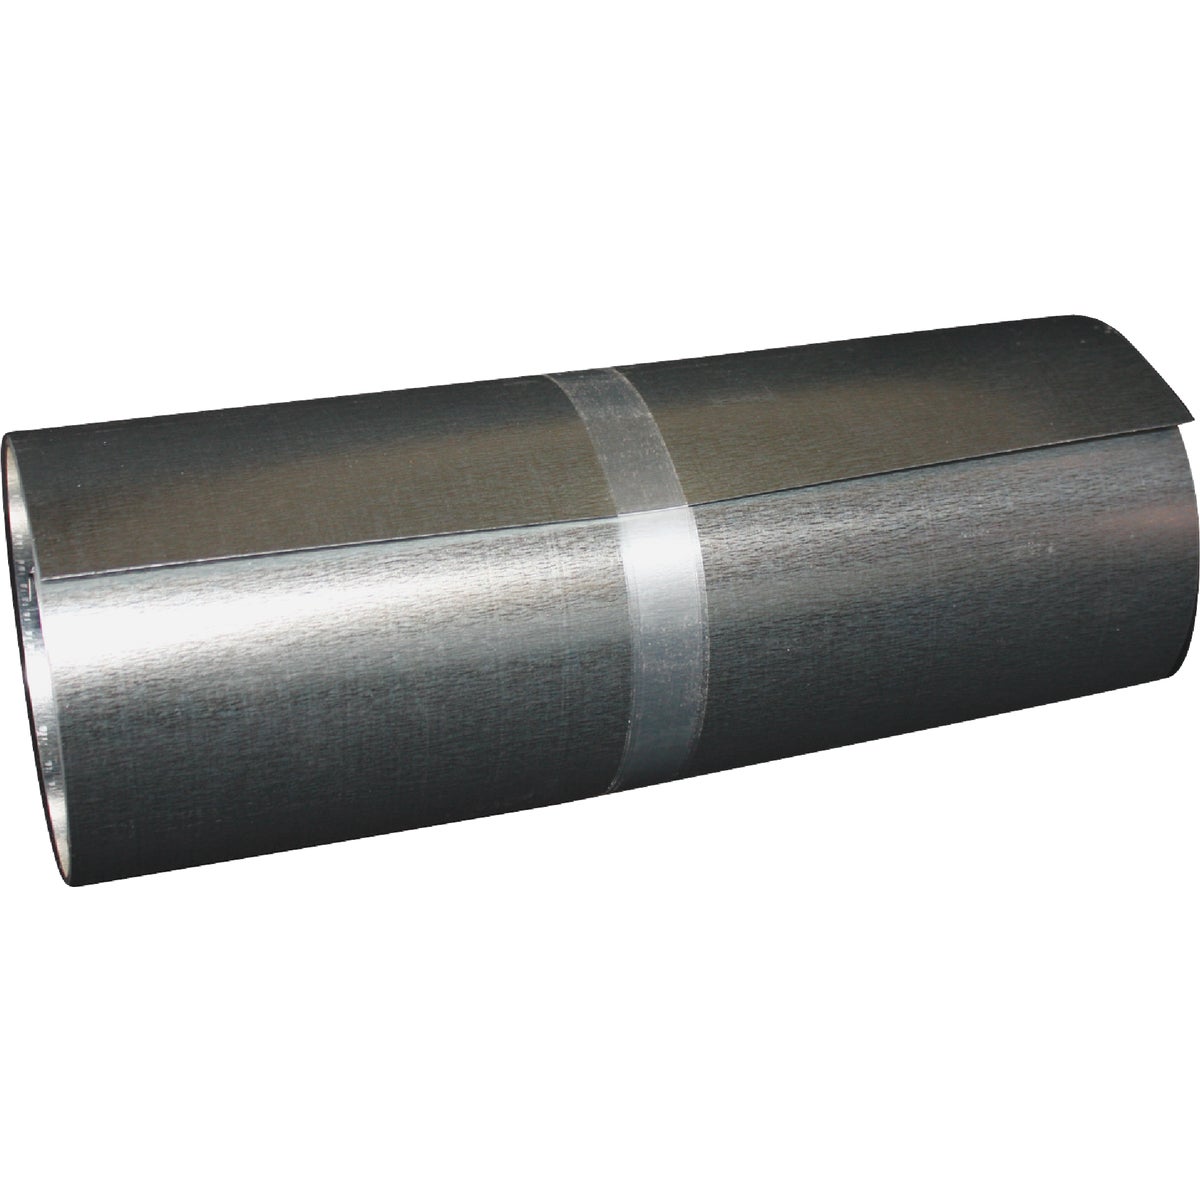 Item 103357, Also referred to as valley metal or valley flashing, is used in a wide 